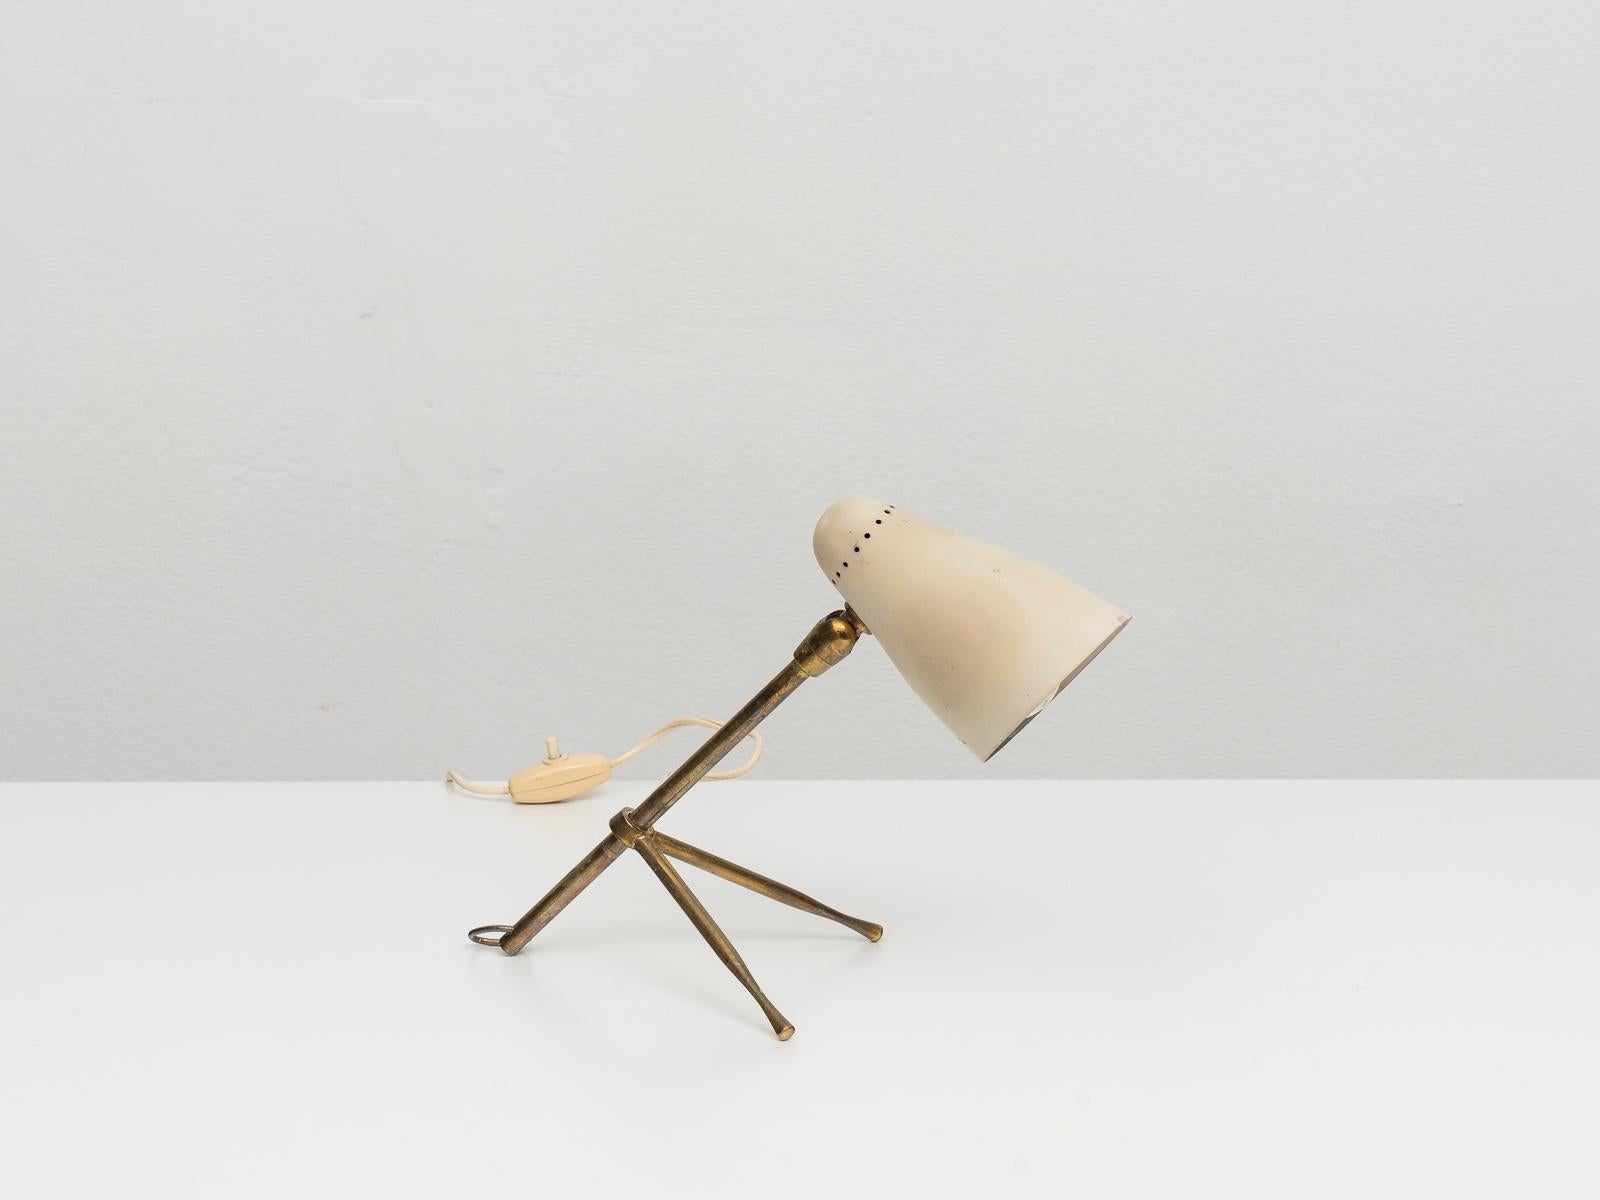 Iconic lamp designed by Giuseppe Ostuni for his own manufacturer, O-Luce. This lamp is model n. 215, also known as 